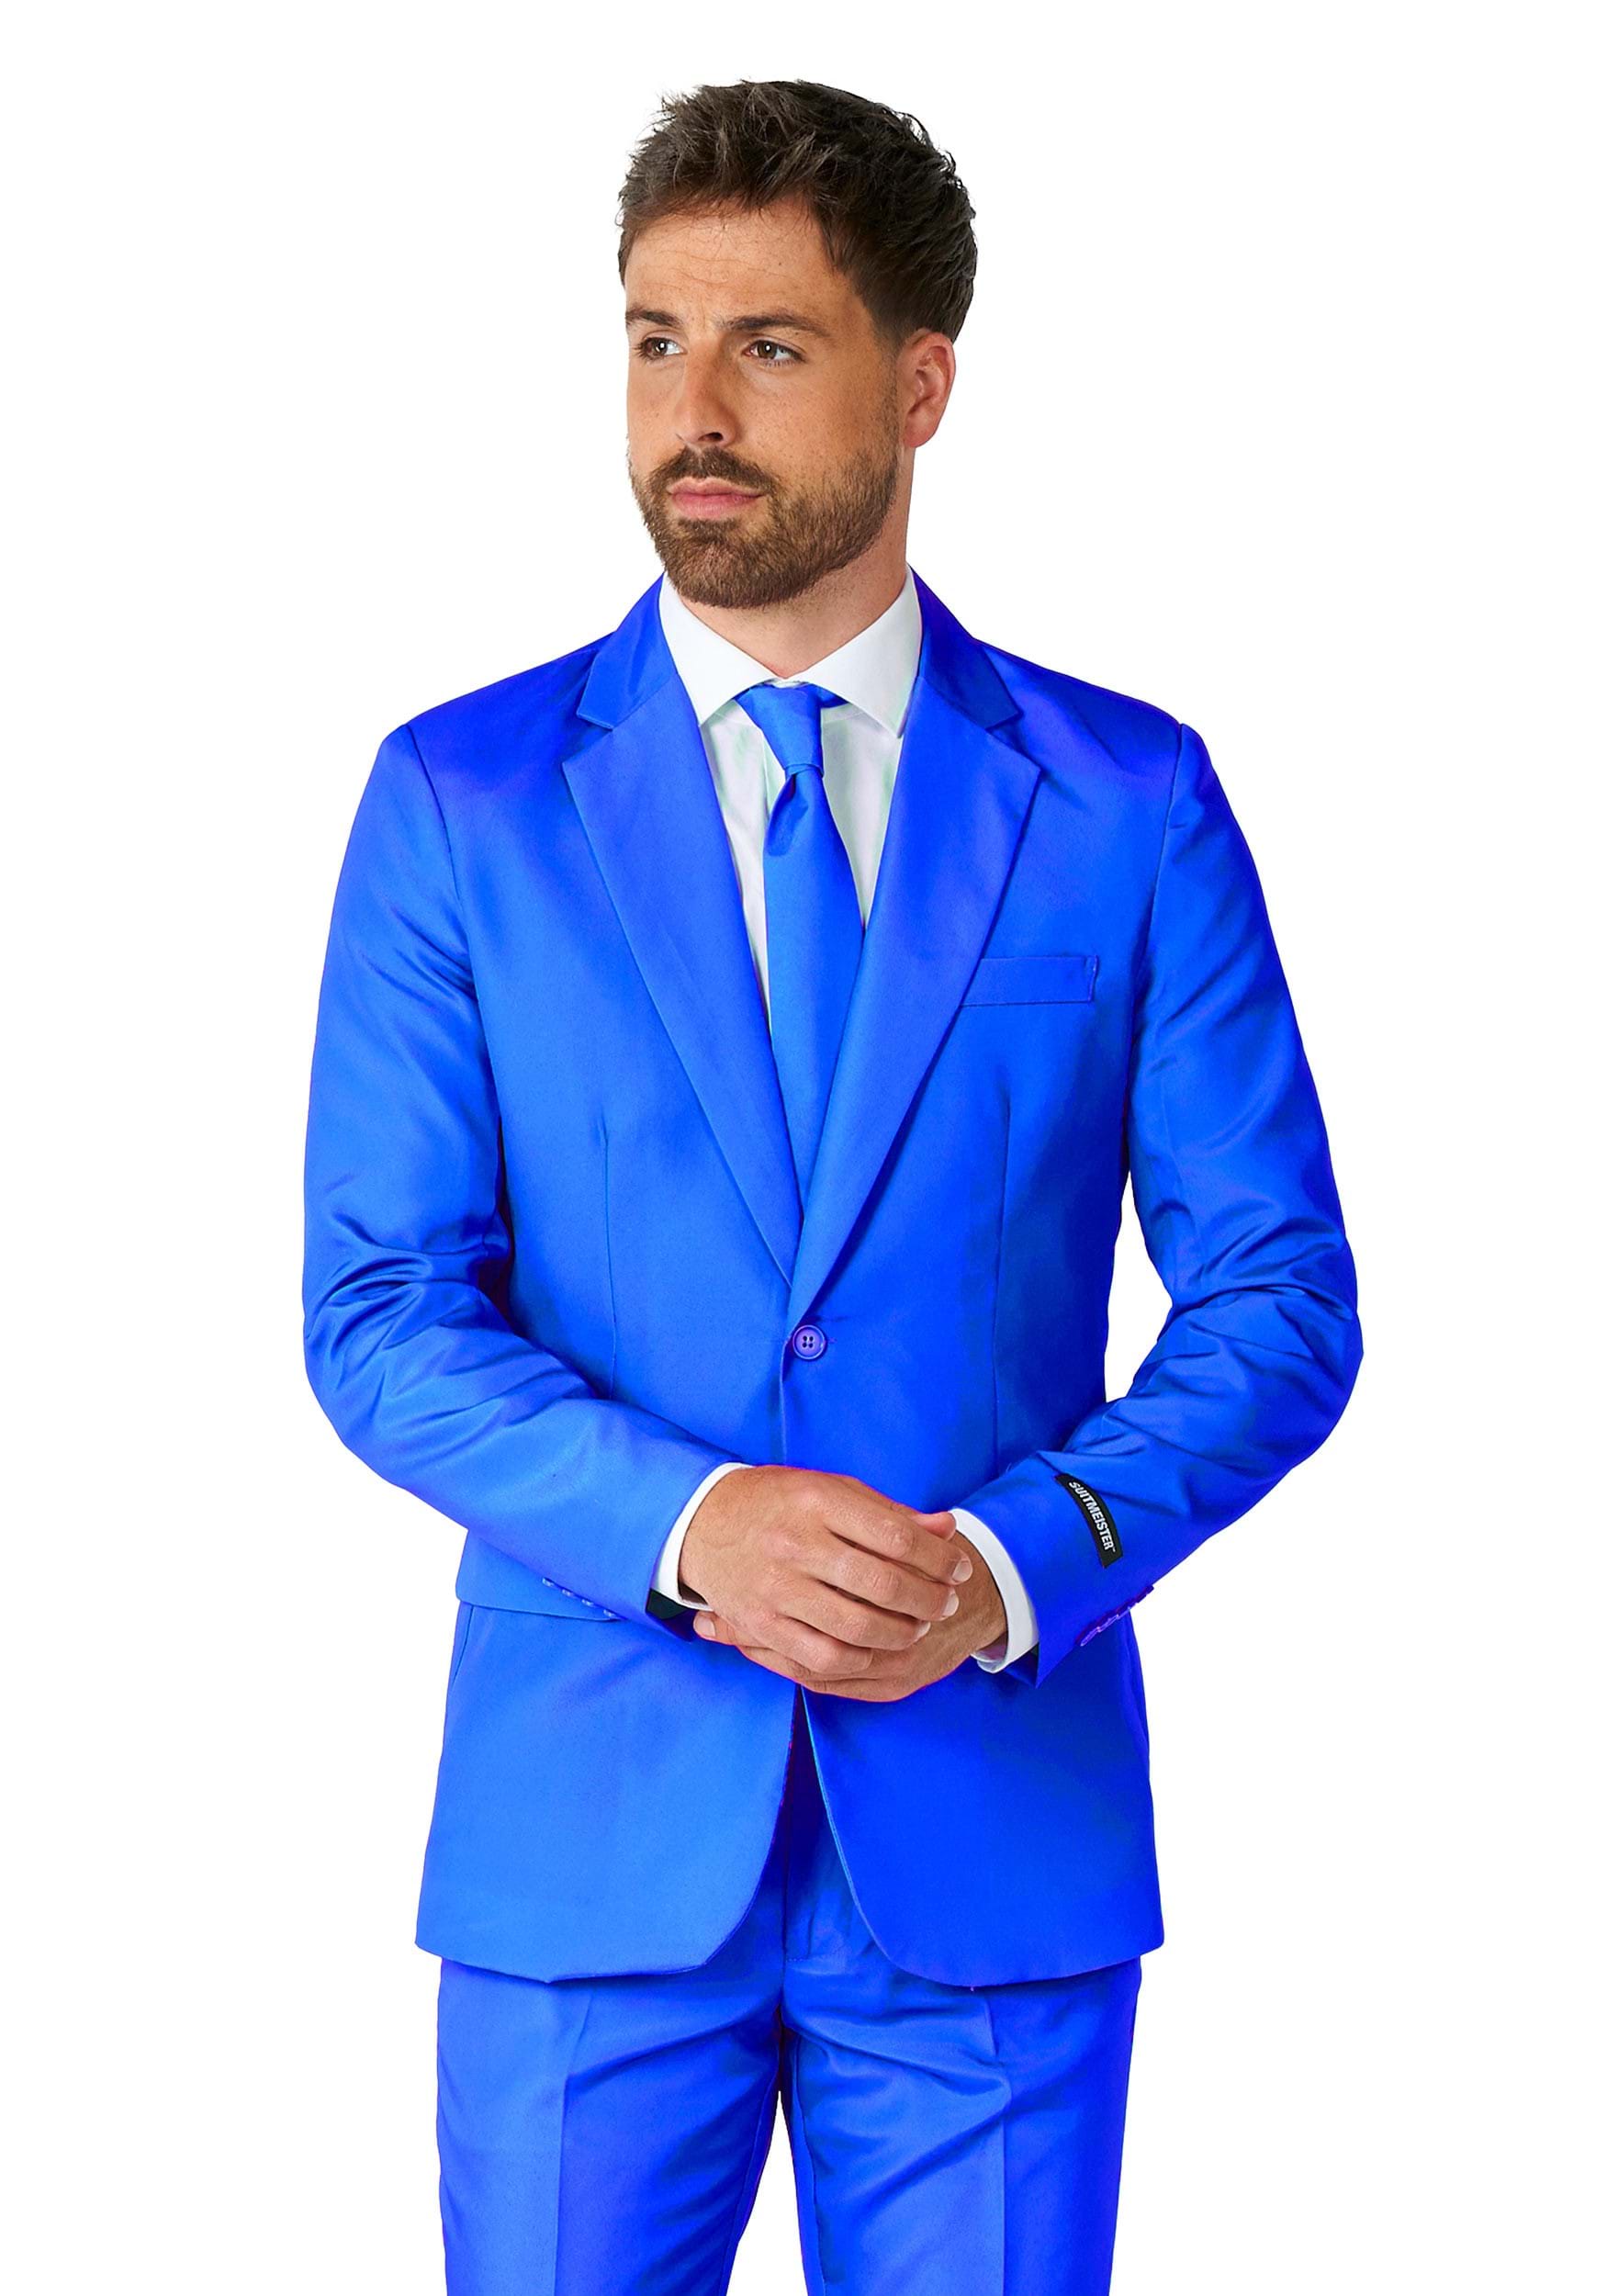 https://images.fun.com/products/74084/2-1-275980/suitmeister-solid-blue-alt-1.jpg